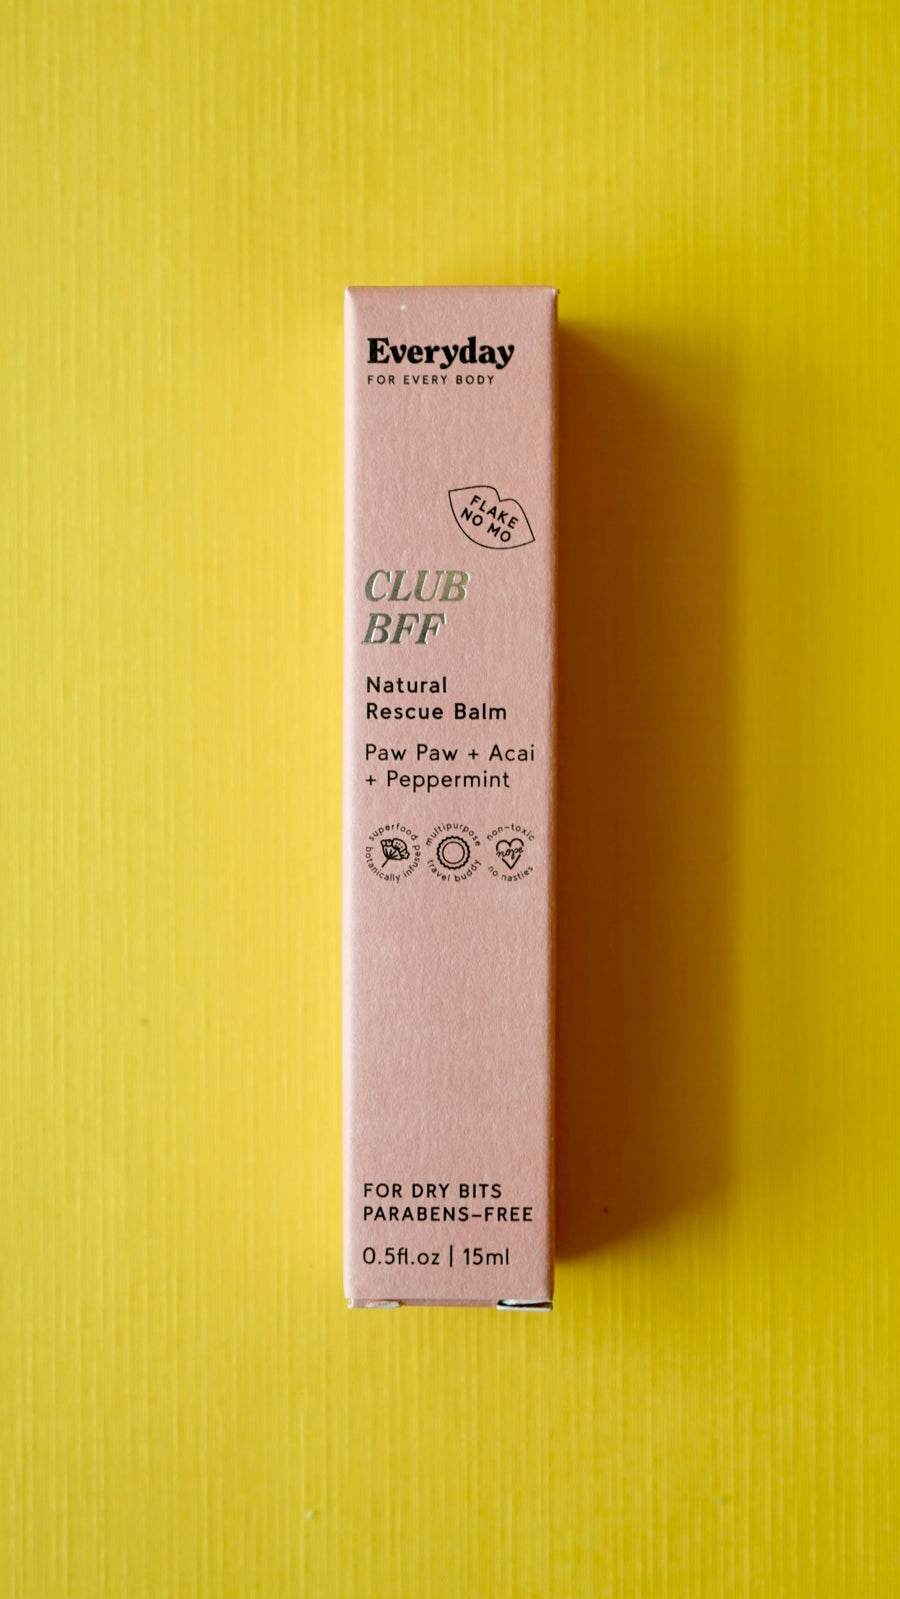 Club BFF Natural Rescue Balm by Everyday for Every Body